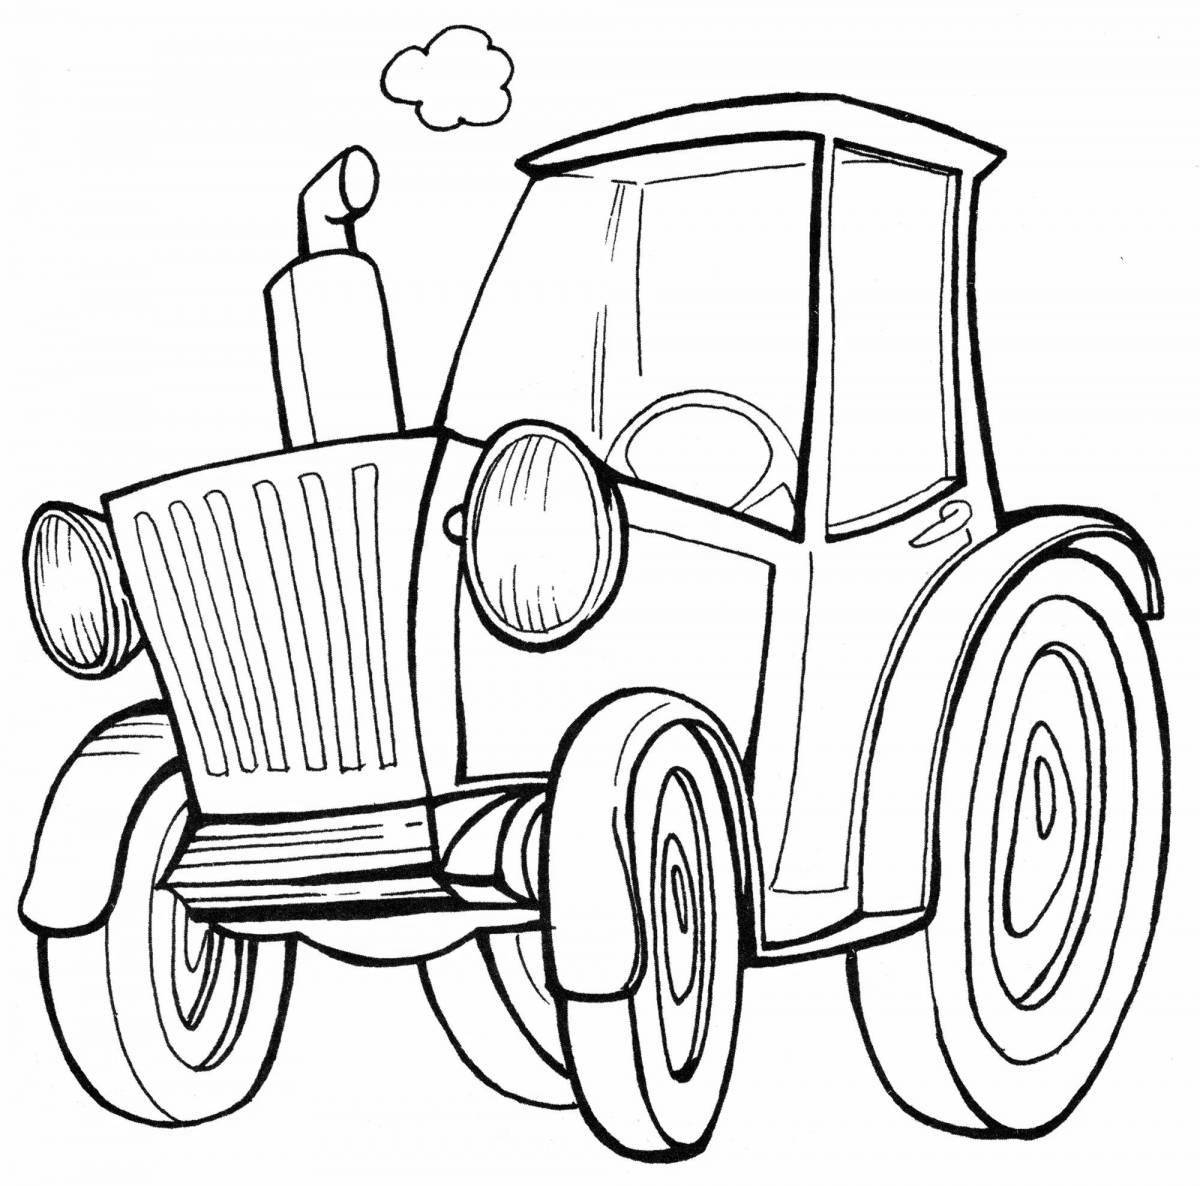 Wonderful blue tractor coloring book